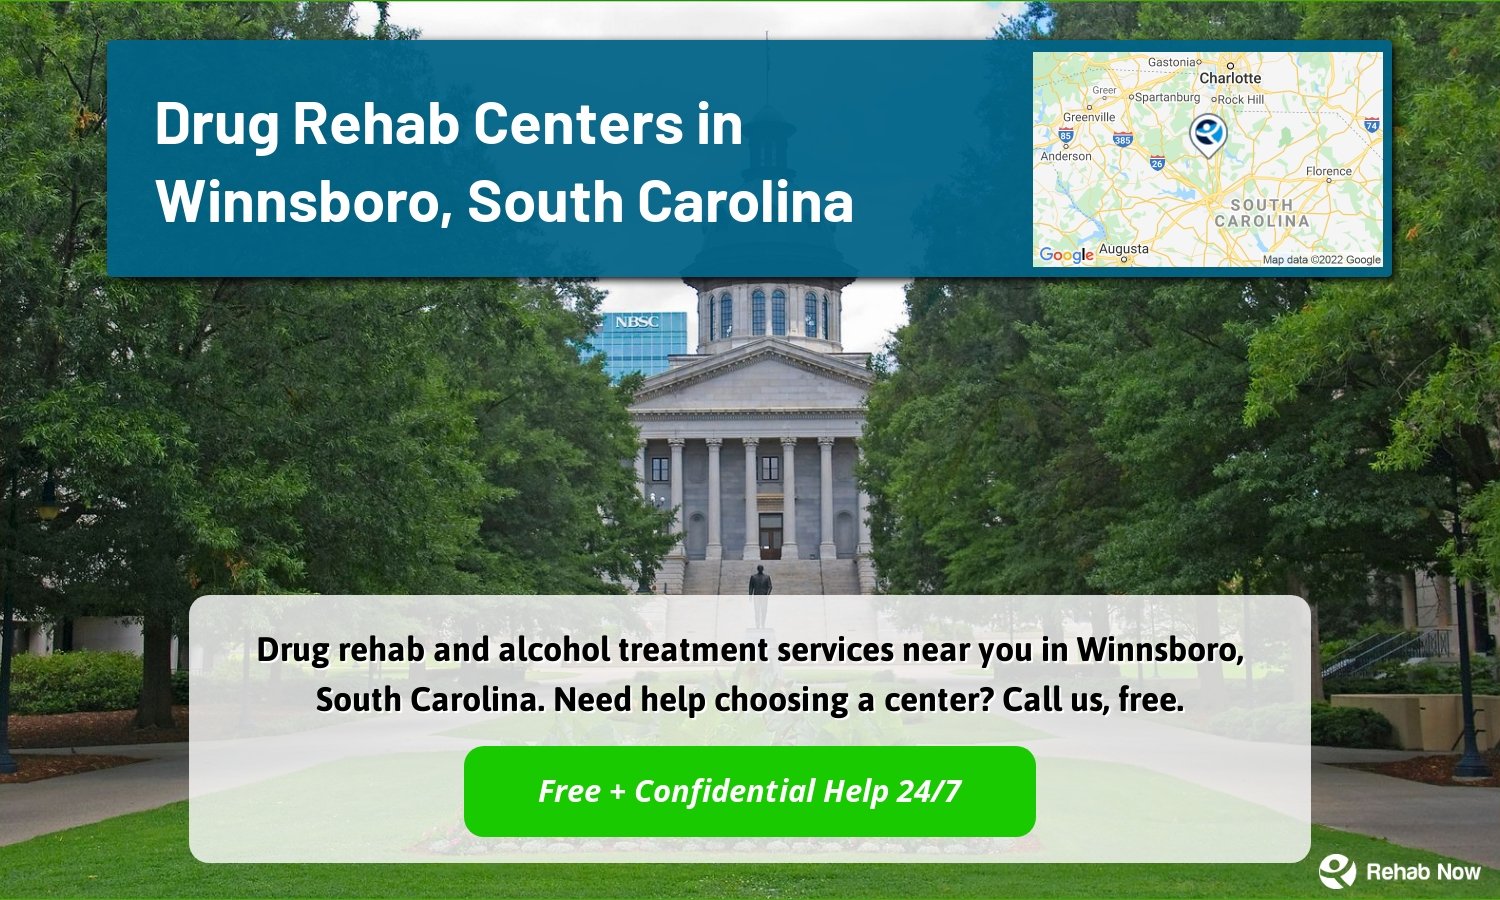 Drug rehab and alcohol treatment services near you in Winnsboro, South Carolina. Need help choosing a center? Call us, free.